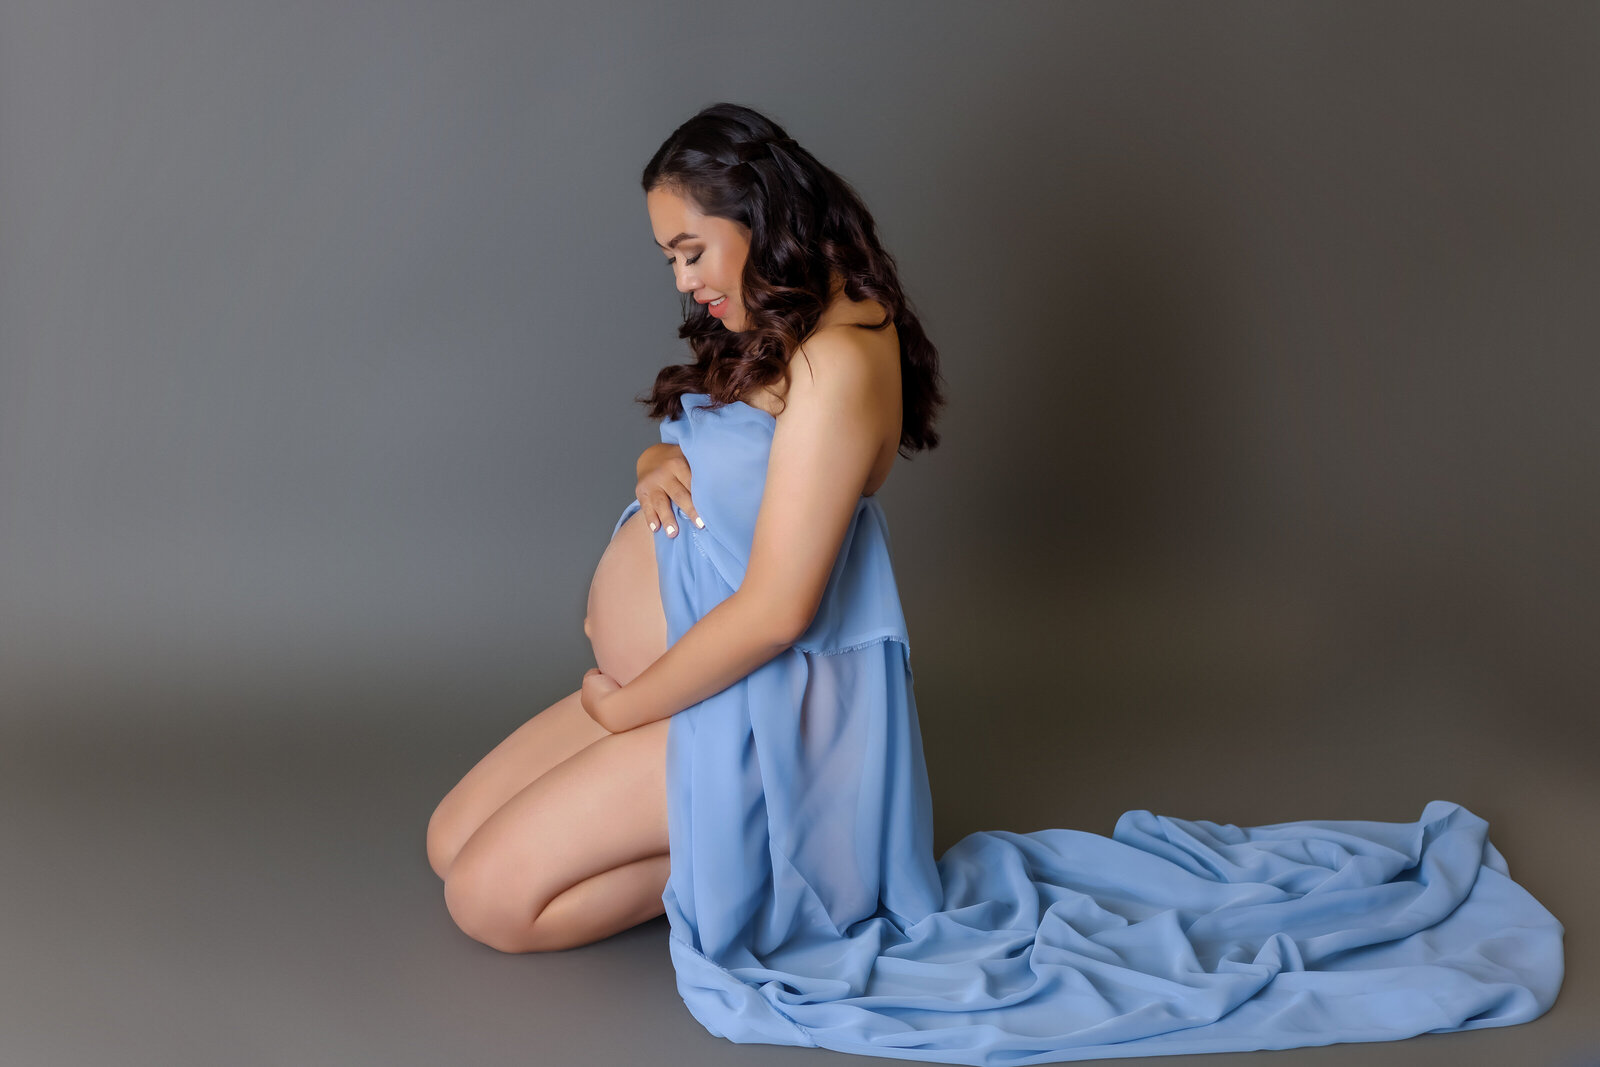 Maternity Photographer, a woman kneels in a pregnancy gown and admires her belly